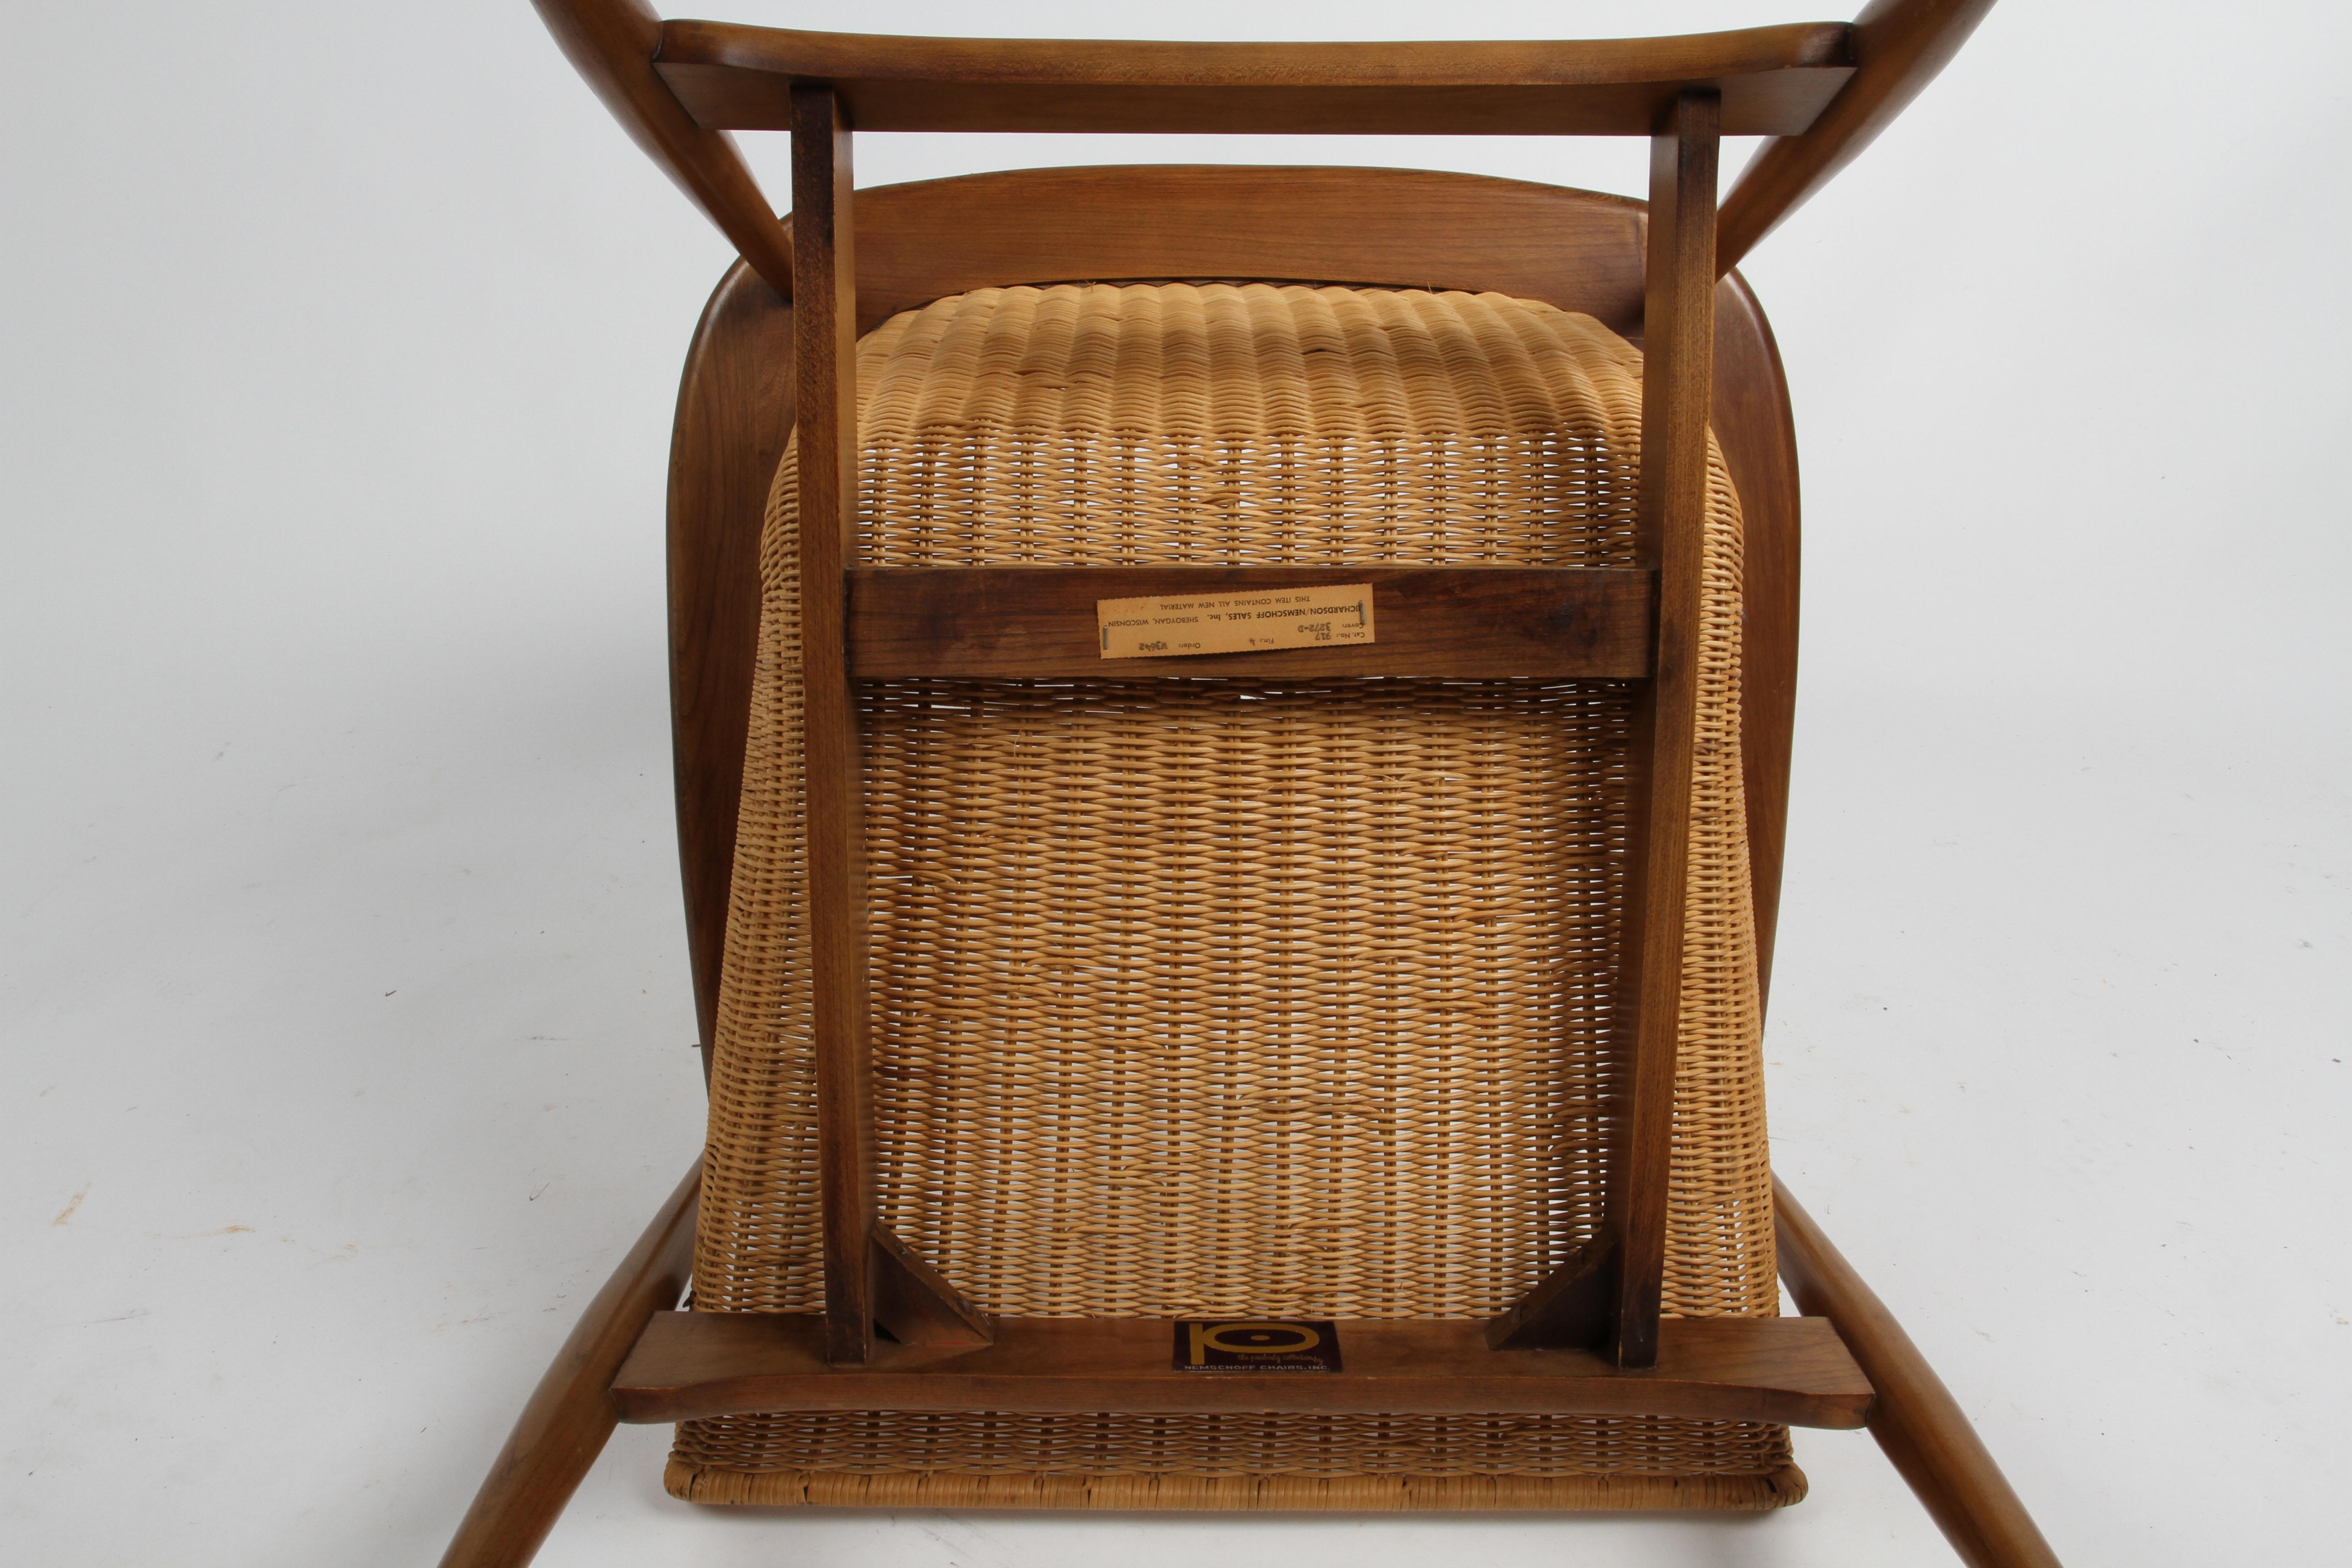 Rare Pair of Lawrence Peabody's Sculptural 1806 / 917 Chairs in Walnut & Rattan 12